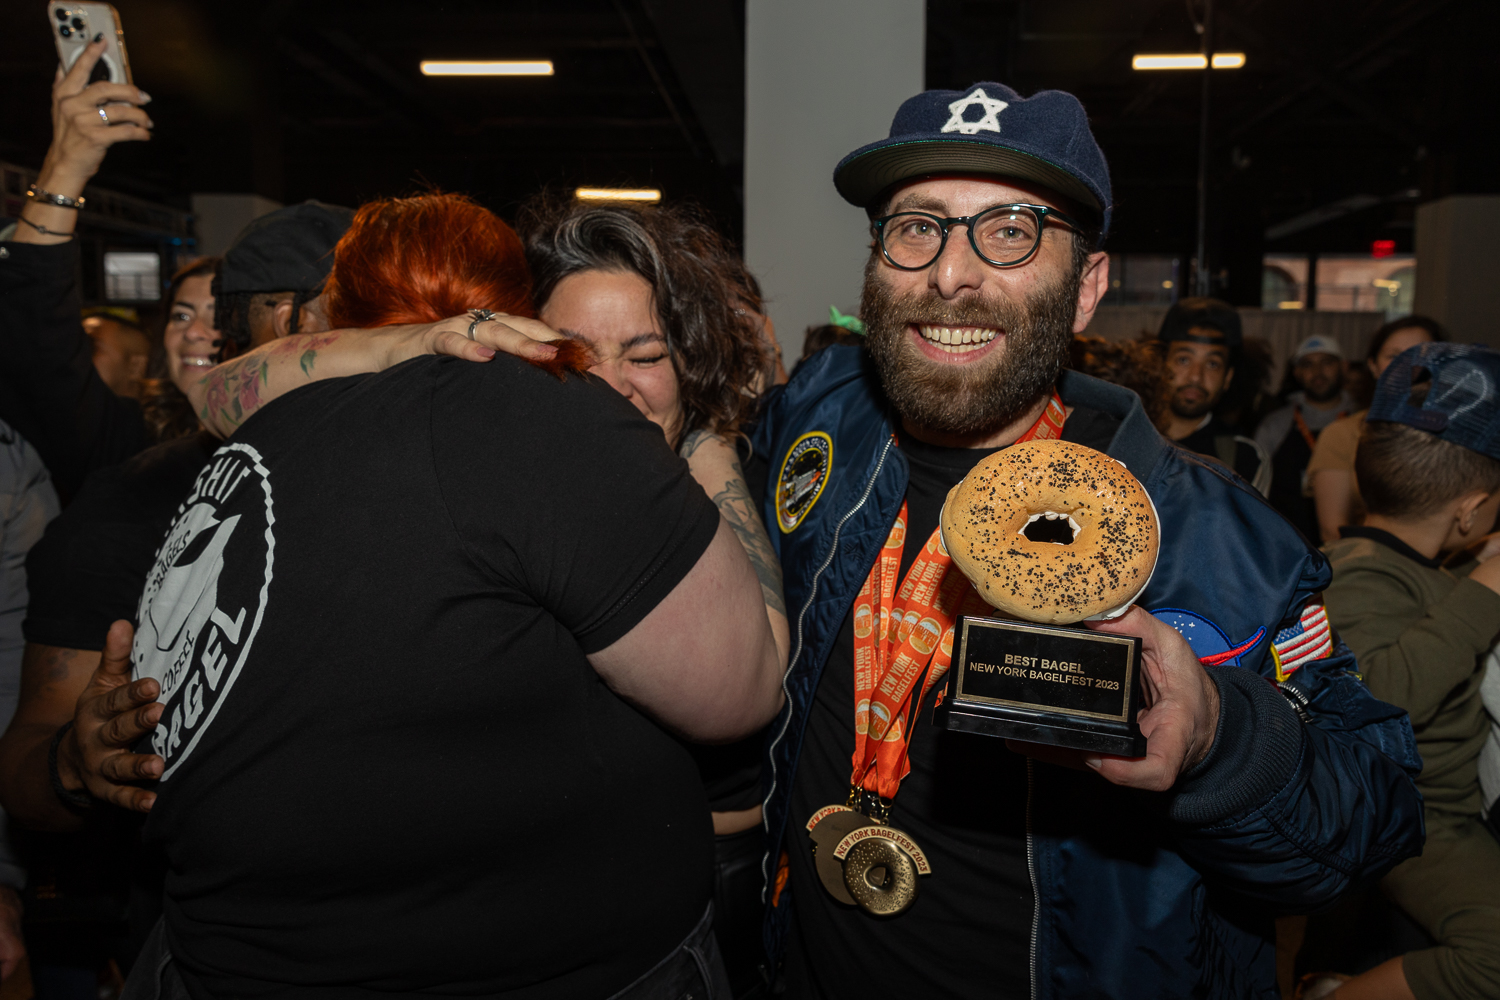 Two women with black shirts hugging. On the right, a man from Starship Bagel, with a black shirt, blue jacket and hat holding a bagel shaped award for “Best Bagel.” He also has three bagel-shaped medals with an orange ribbon around his neck.